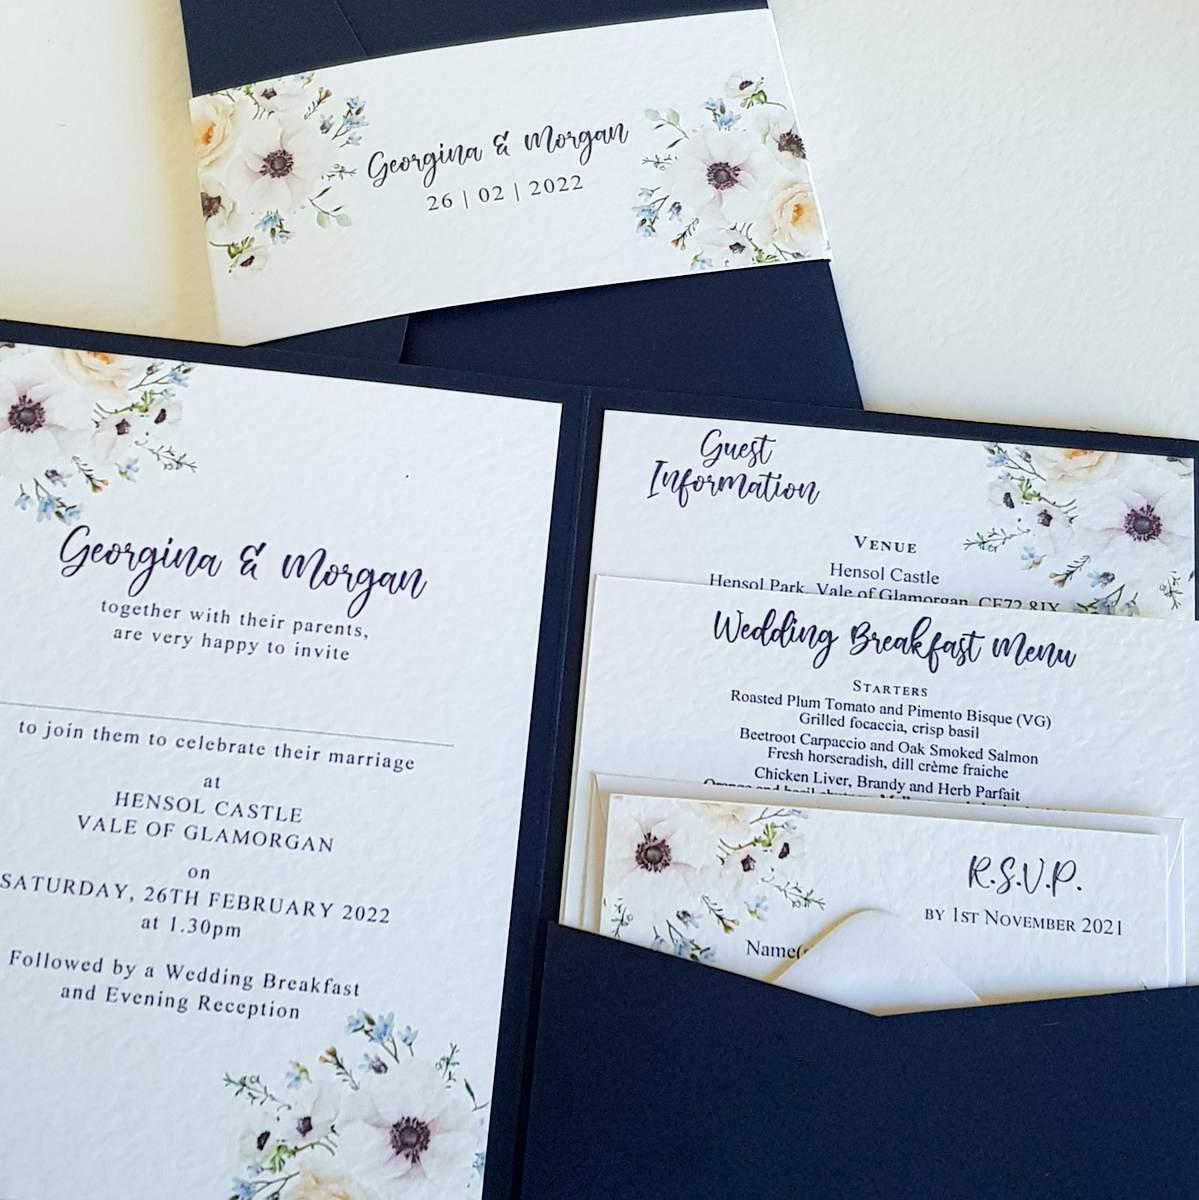 wedding invitations, an open pocketfold showing the invitation panel and the information cards inside the pocket. The outer pocket is navy blue and the cards inside are white, printed with a floral anemone design